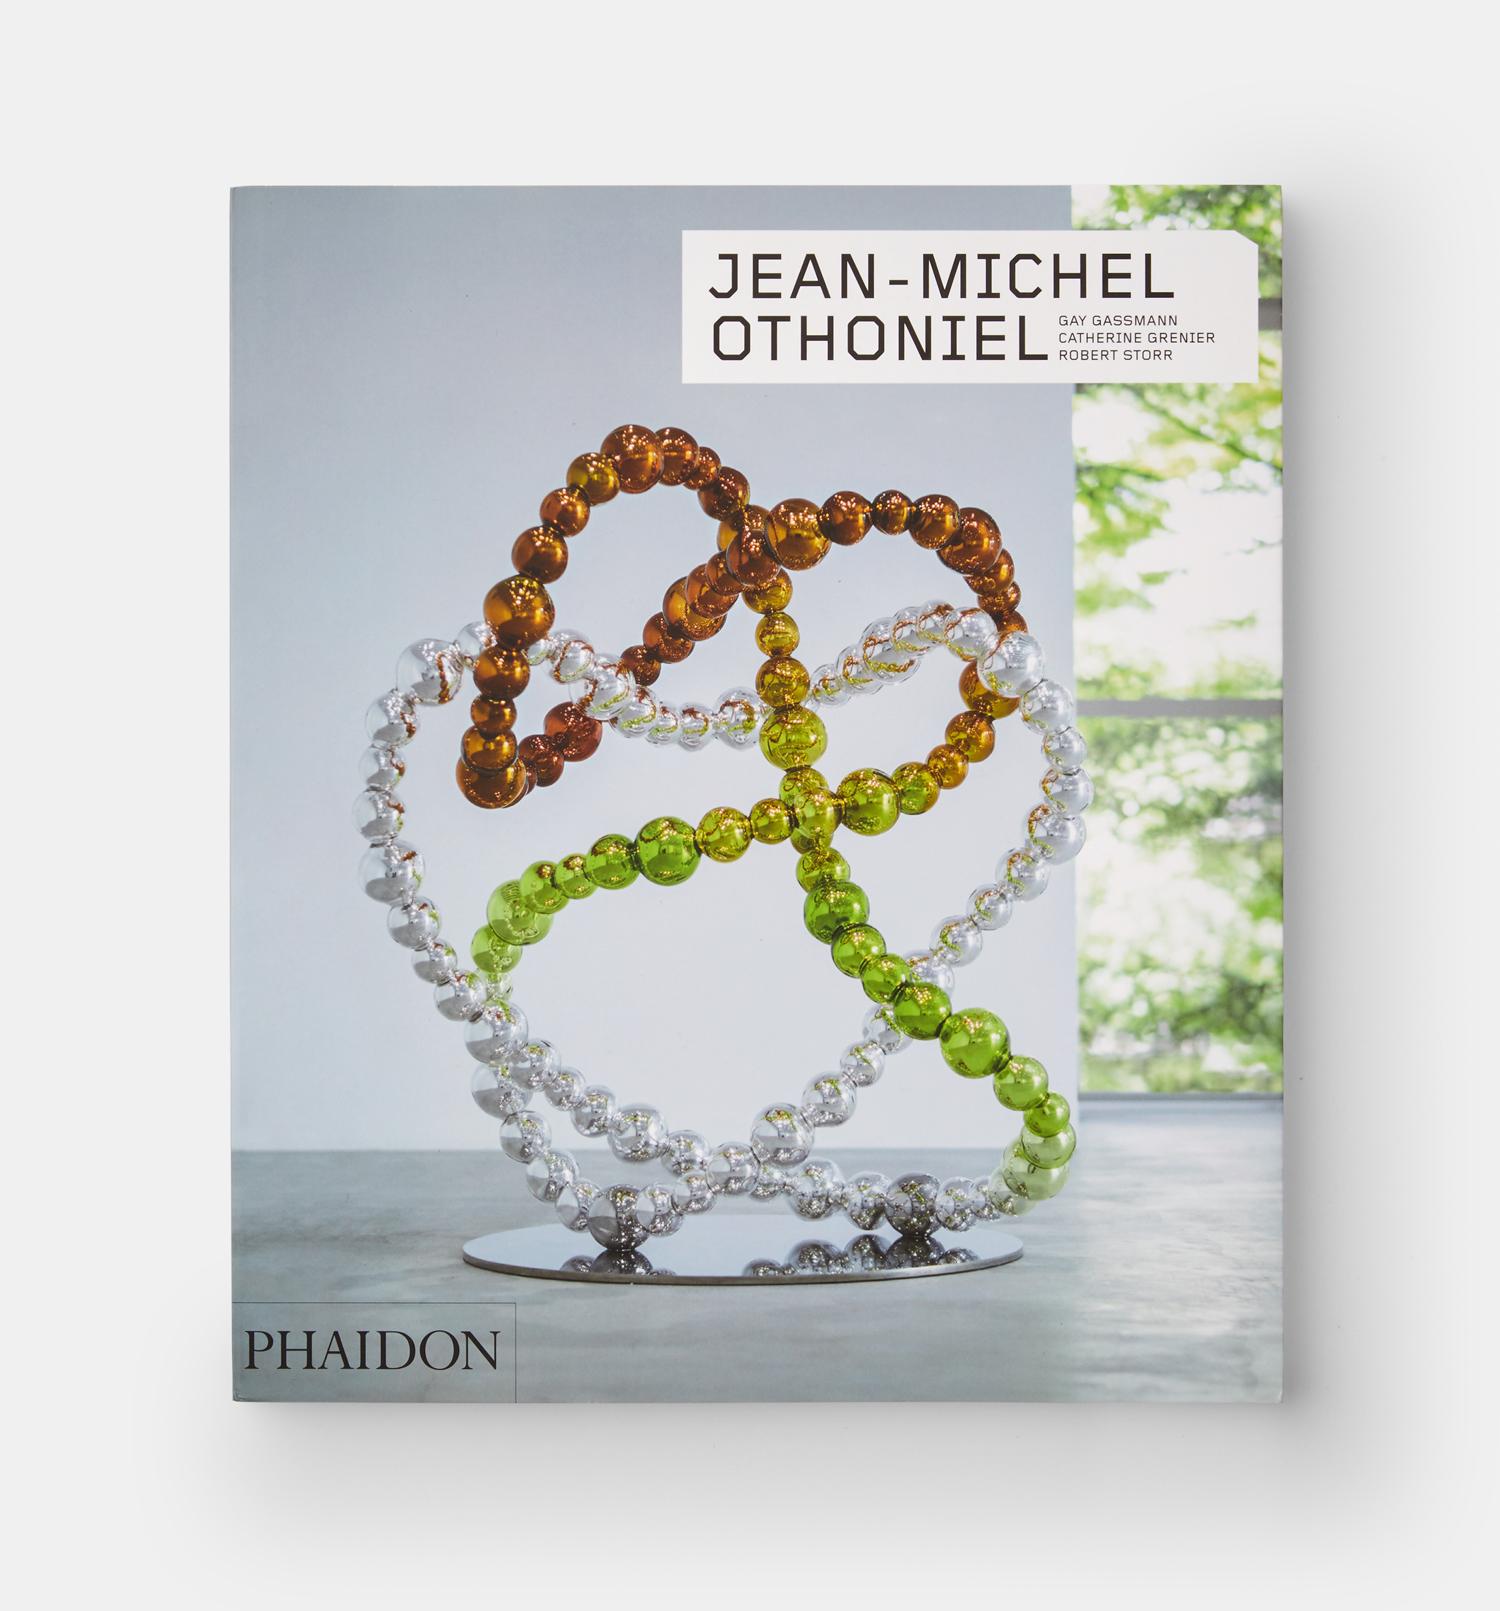 The groundbreaking sculptor's most comprehensive monograph to date
Jean-Michel Othoniel is an artist who creates sculptures that explore themes of fragility, transformation, and ephemerality. Using the repetition of such modular elements as bricks